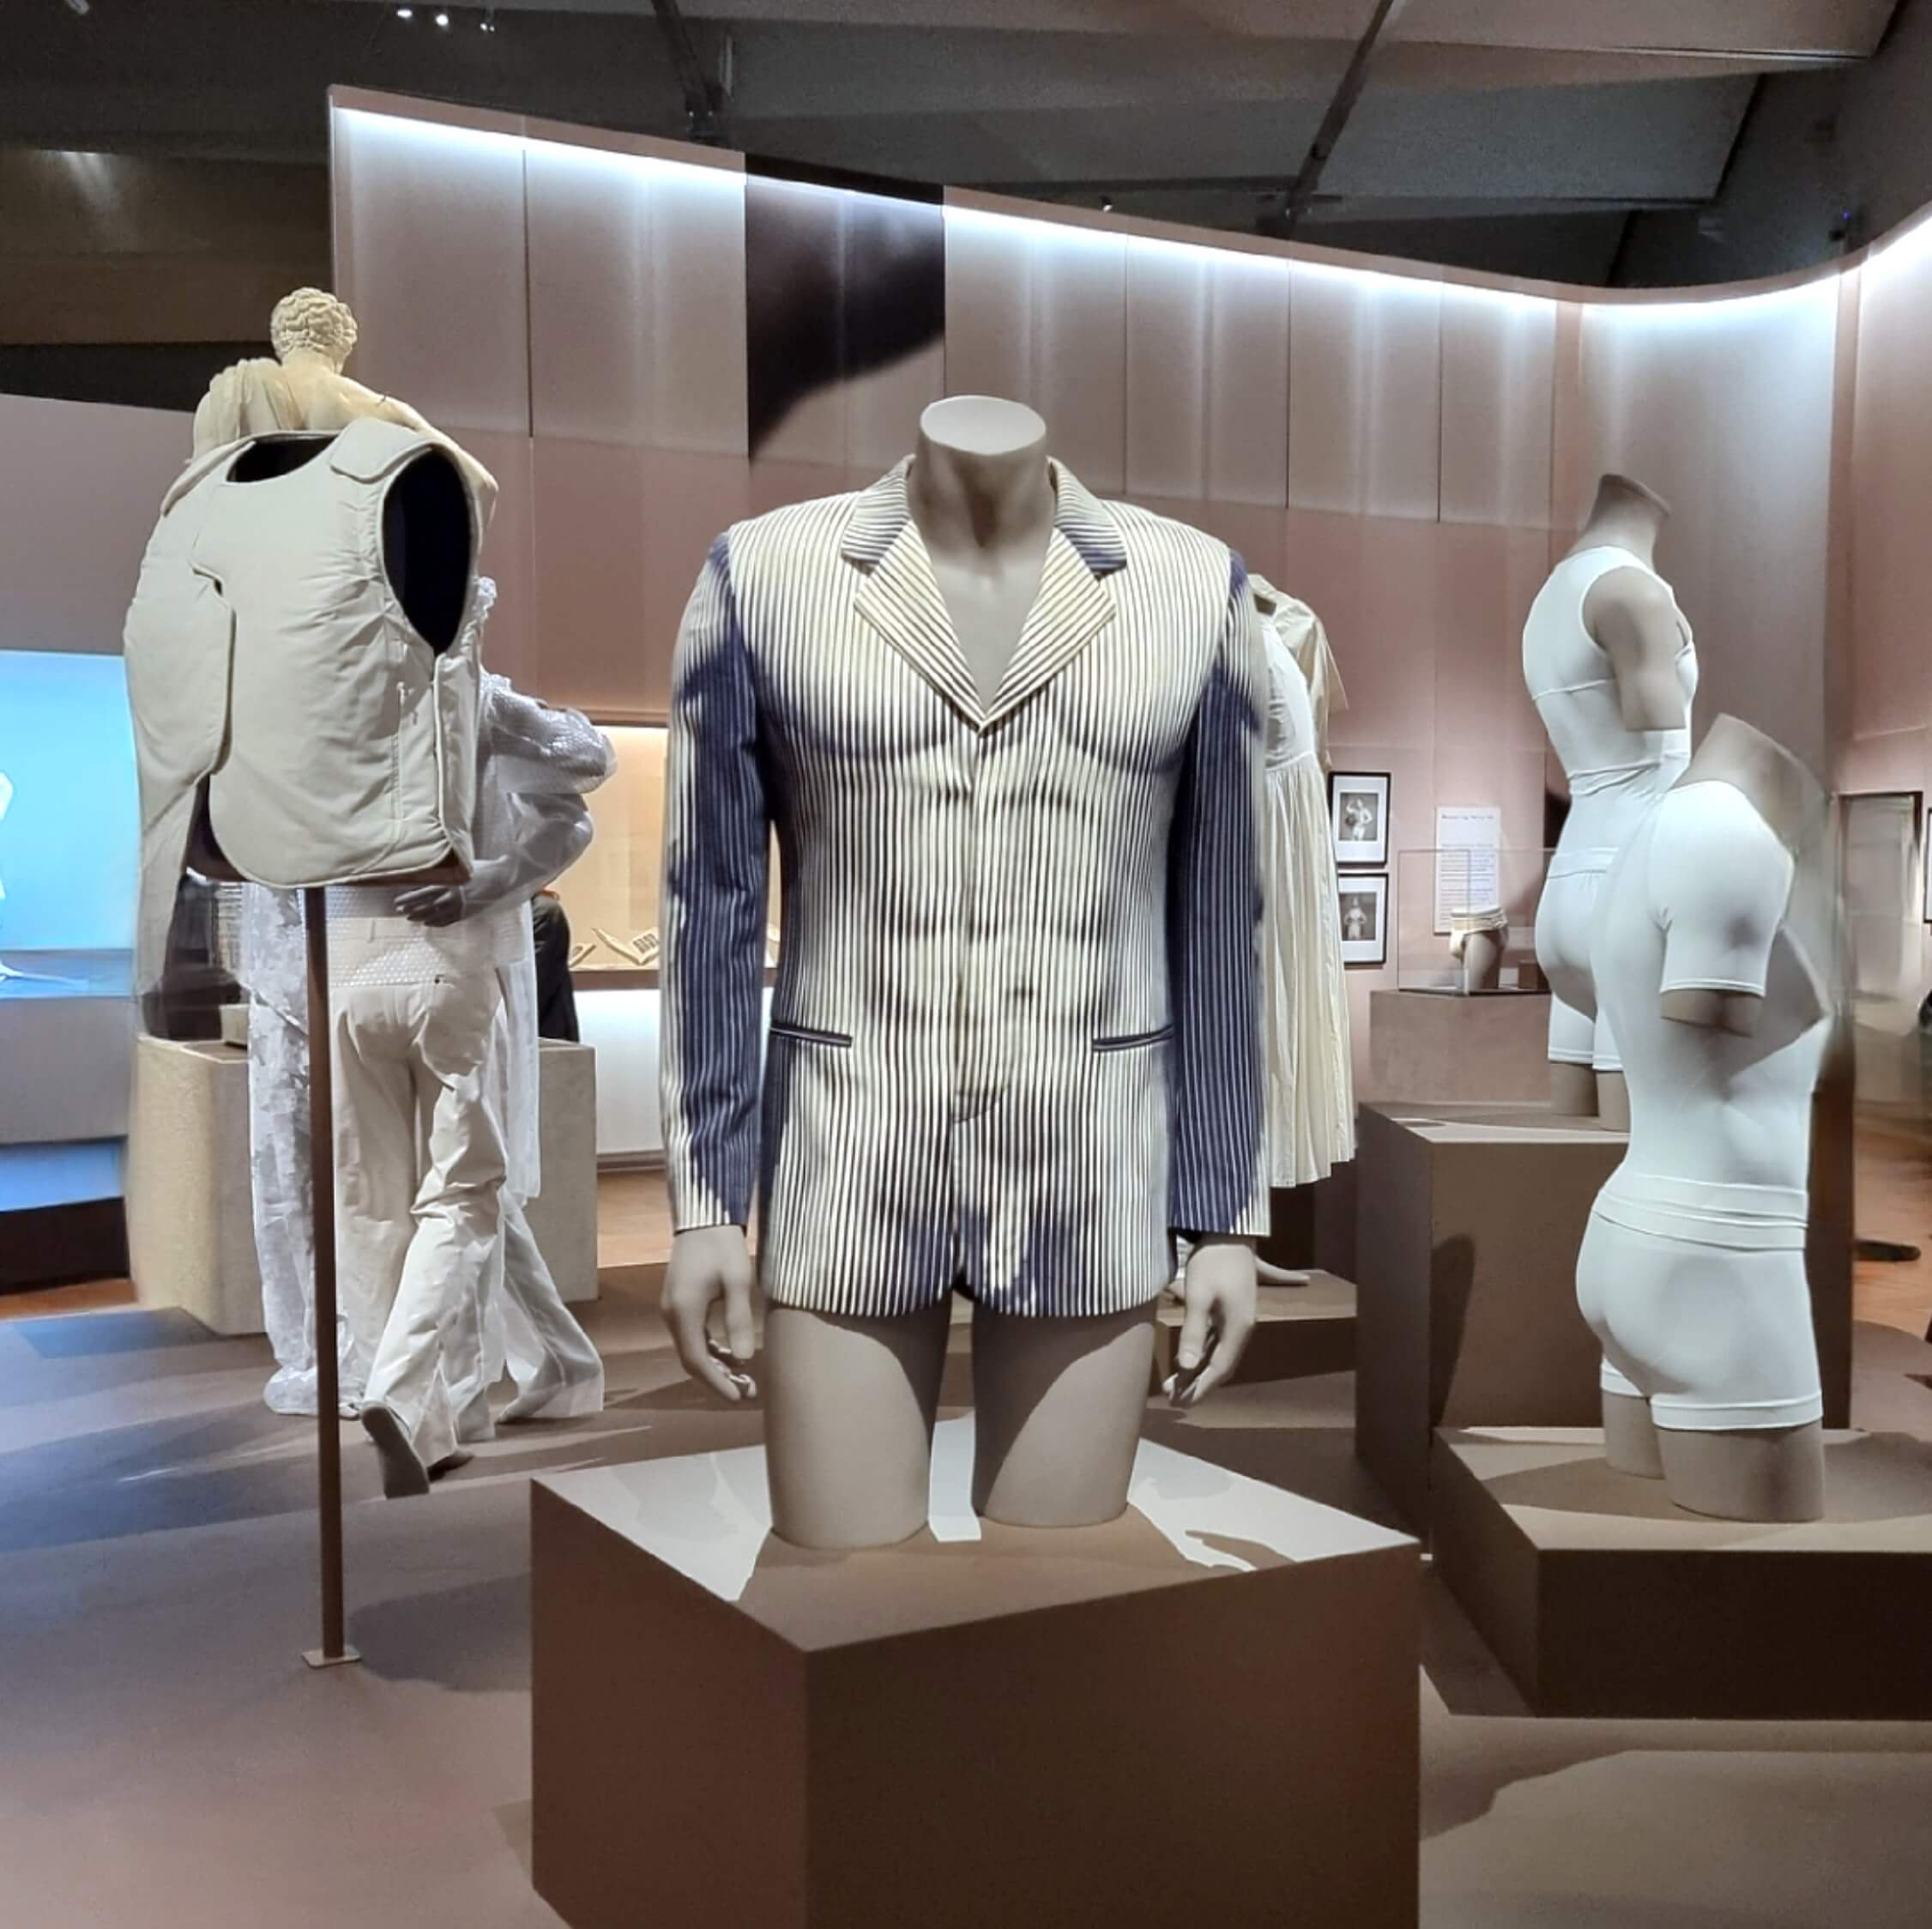 "Fashioning Masculinities. The Art of Menswear" at the V&A Museum, London / Exhibition View / 2022